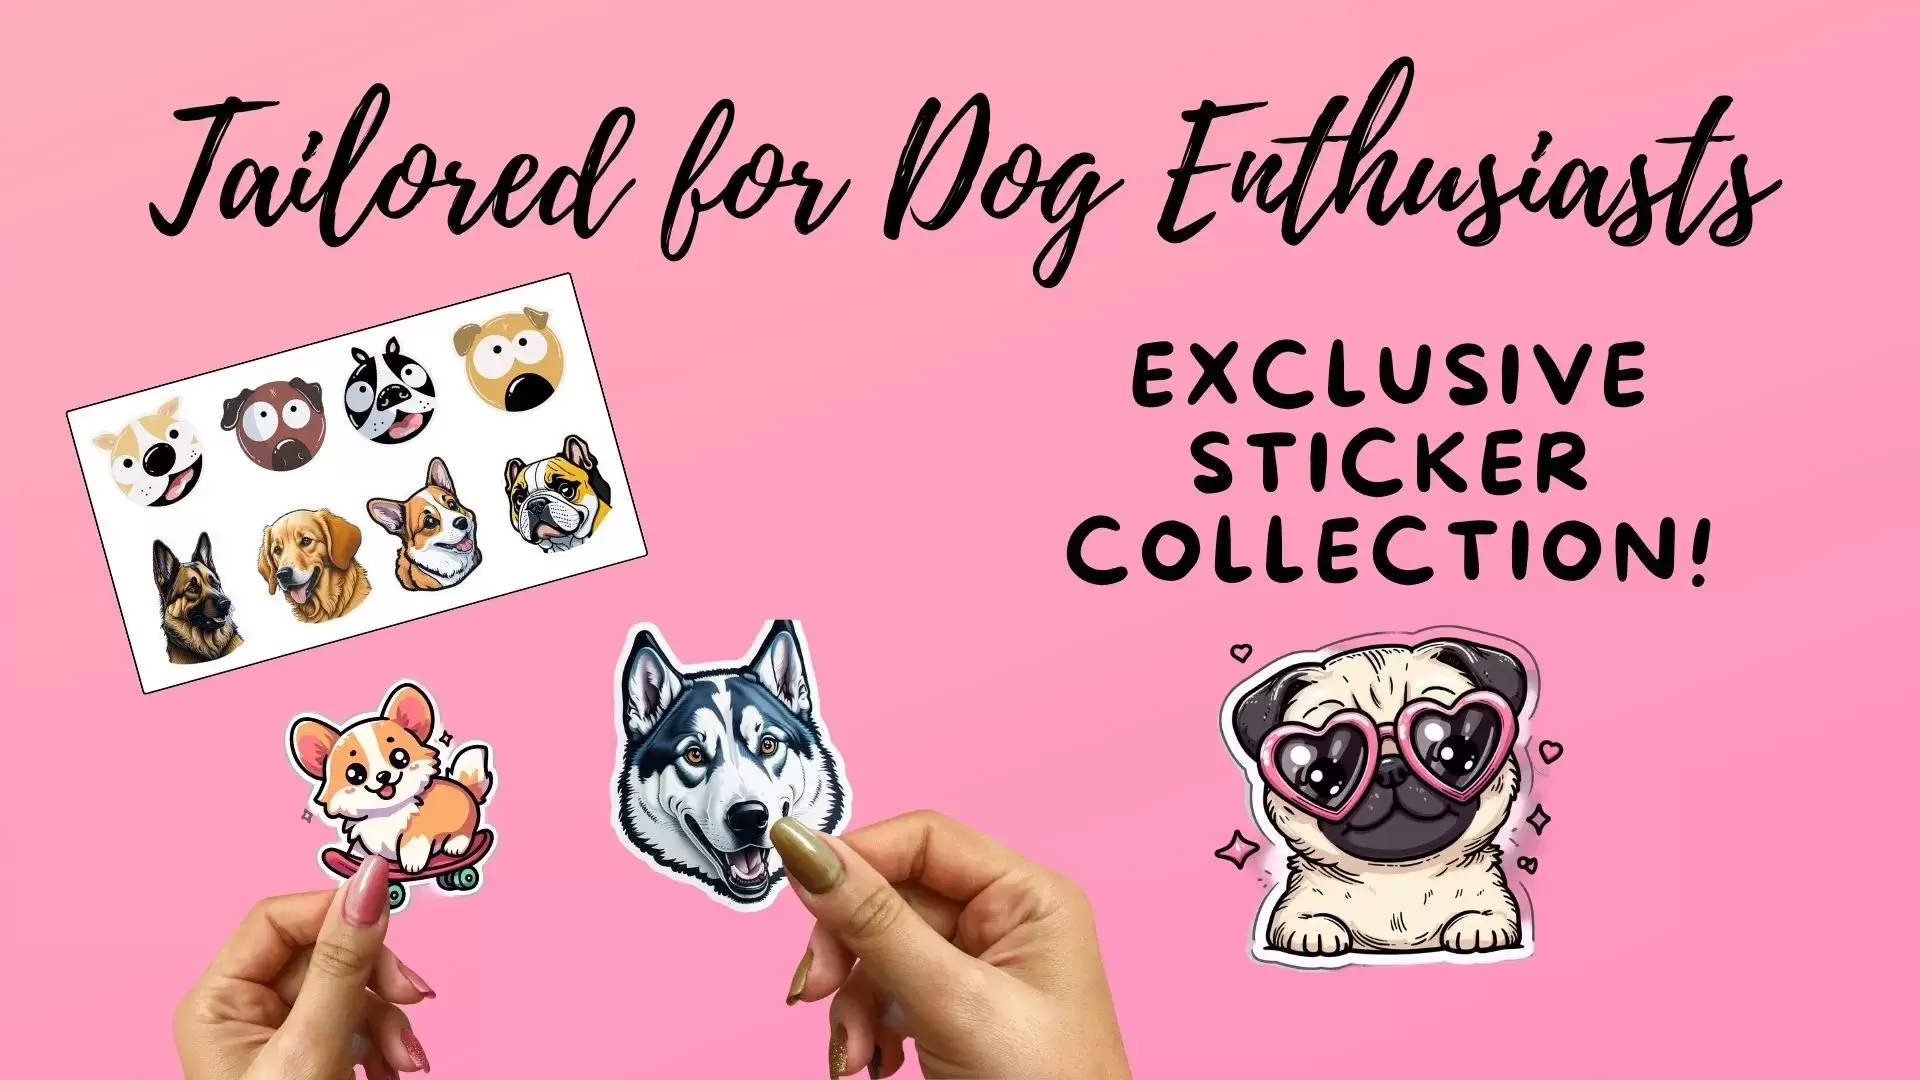 Tailored for Dog Enthusiasts - Exclusive Sticker Collection!